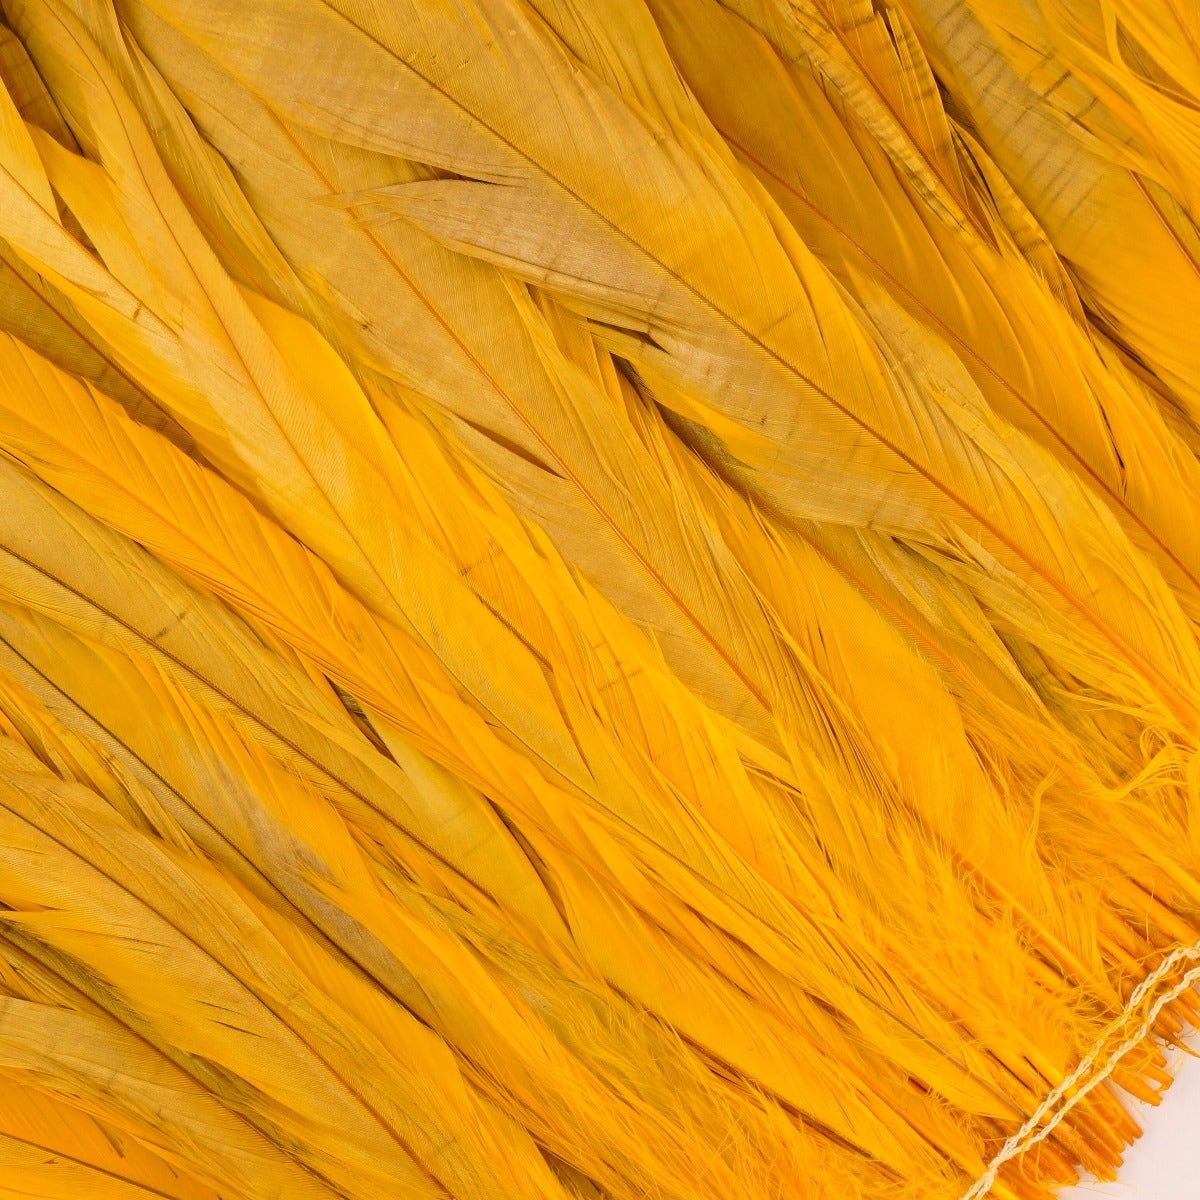 ROOSTER COQUE TAILS FEATHERS BLEACH DYED 7-10” - 1/2 Yard ( 18" ) - Gold